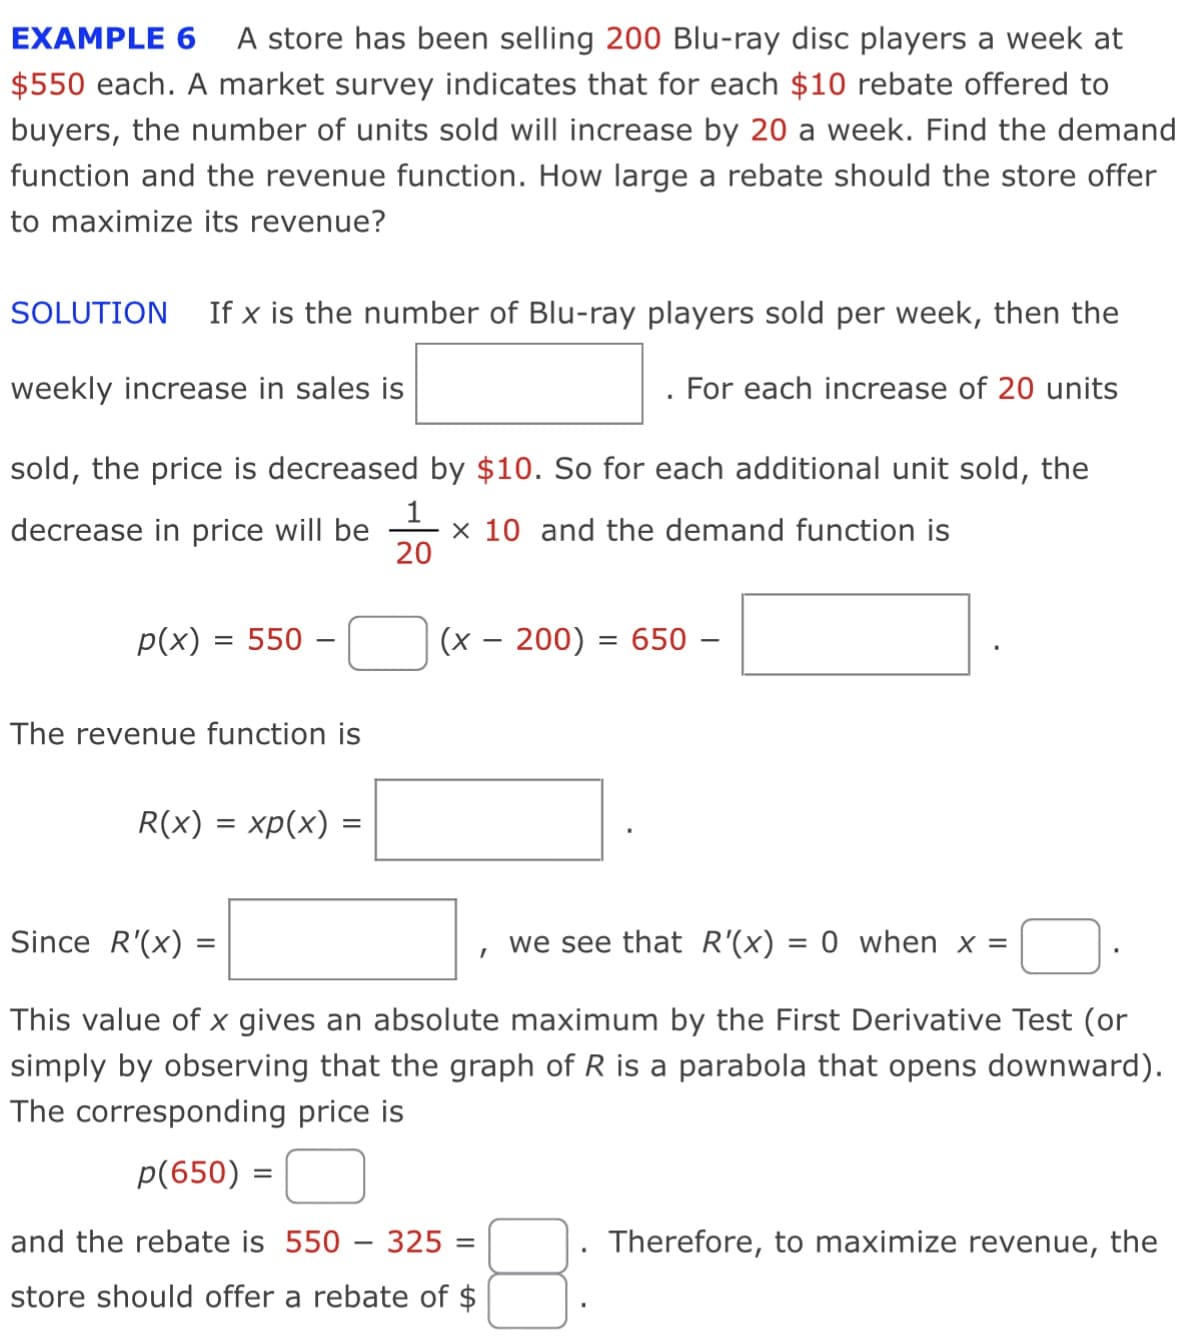 EXAMPLE 6
A store has been selling 200 Blu-ray disc players a week at
$550 each. A market survey indicates that for each $10 rebate offered to
buyers, the number of units sold will increase by 20 a week. Find the demand
function and the revenue function. How large a rebate should the store offer
to maximize its revenue?
SOLUTION
If x is the number of Blu-ray players sold per week, then the
weekly increase in sales is
For each increase of 20 units
sold, the price is decreased by $10. So for each additional unit sold, the
1
x 10 and the demand function is
20
decrease in price will be
p(x) = 550 –
(x – 200) = 650 –
The revenue function is
R(x) = xp(x) =
Since R'(x) =
we see that R'(x) = 0 when x =
This value of x gives an absolute maximum by the First Derivative Test (or
simply by observing that the graph of R is a parabola that opens downward).
The corresponding price is
p(650) =
and the rebate is 550 – 325 =
Therefore, to maximize revenue,
the
store should offer a rebate of $
